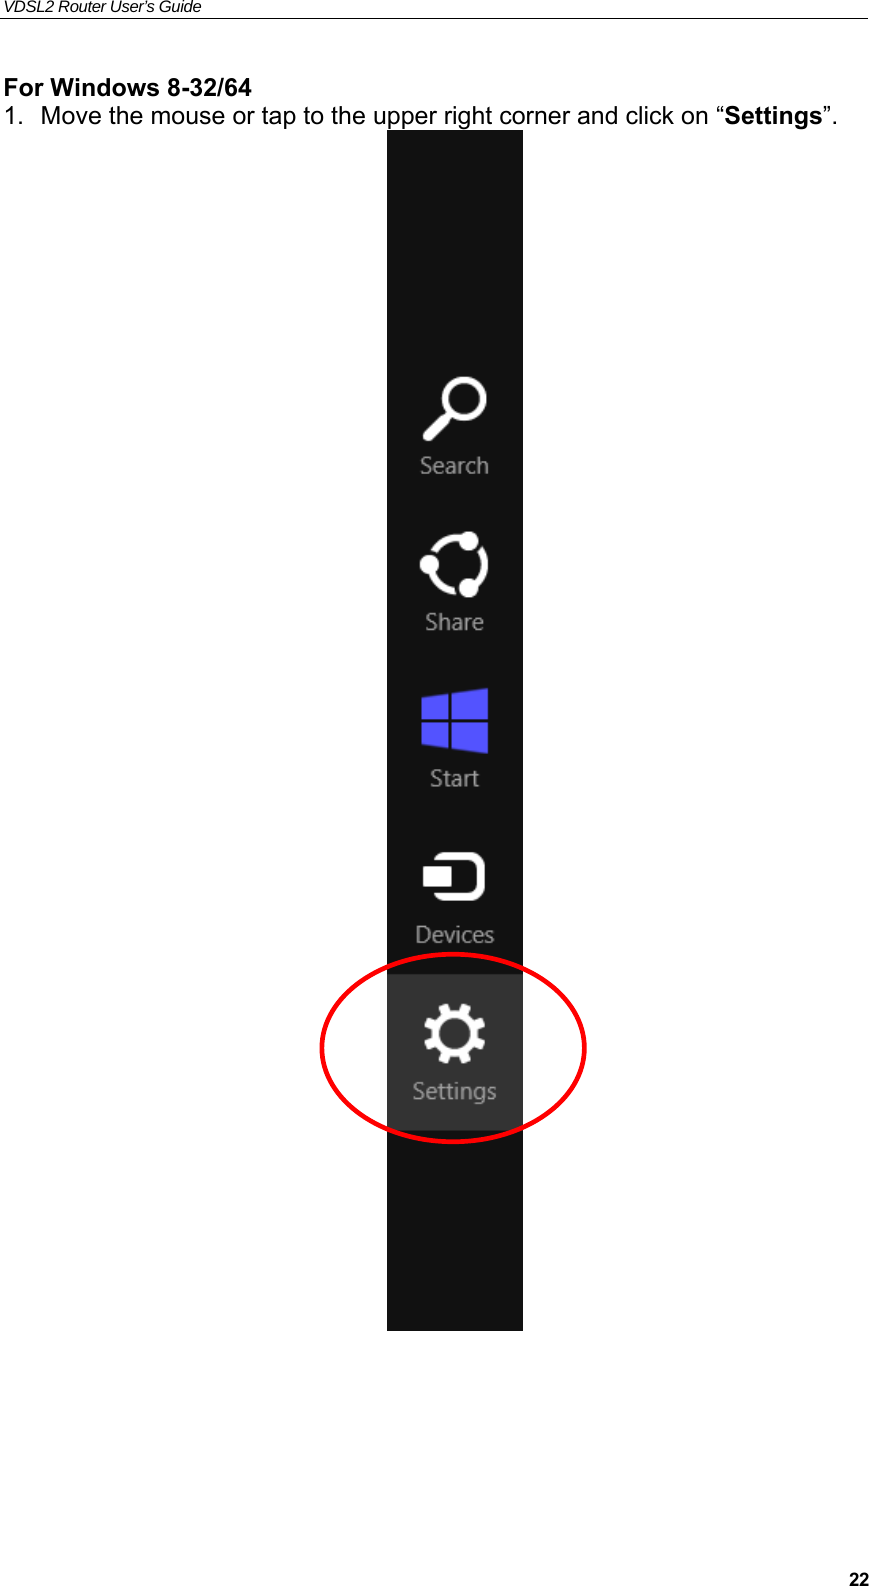 VDSL2 Router User’s Guide     22For Windows 8-32/64 1.  Move the mouse or tap to the upper right corner and click on “Settings”.       